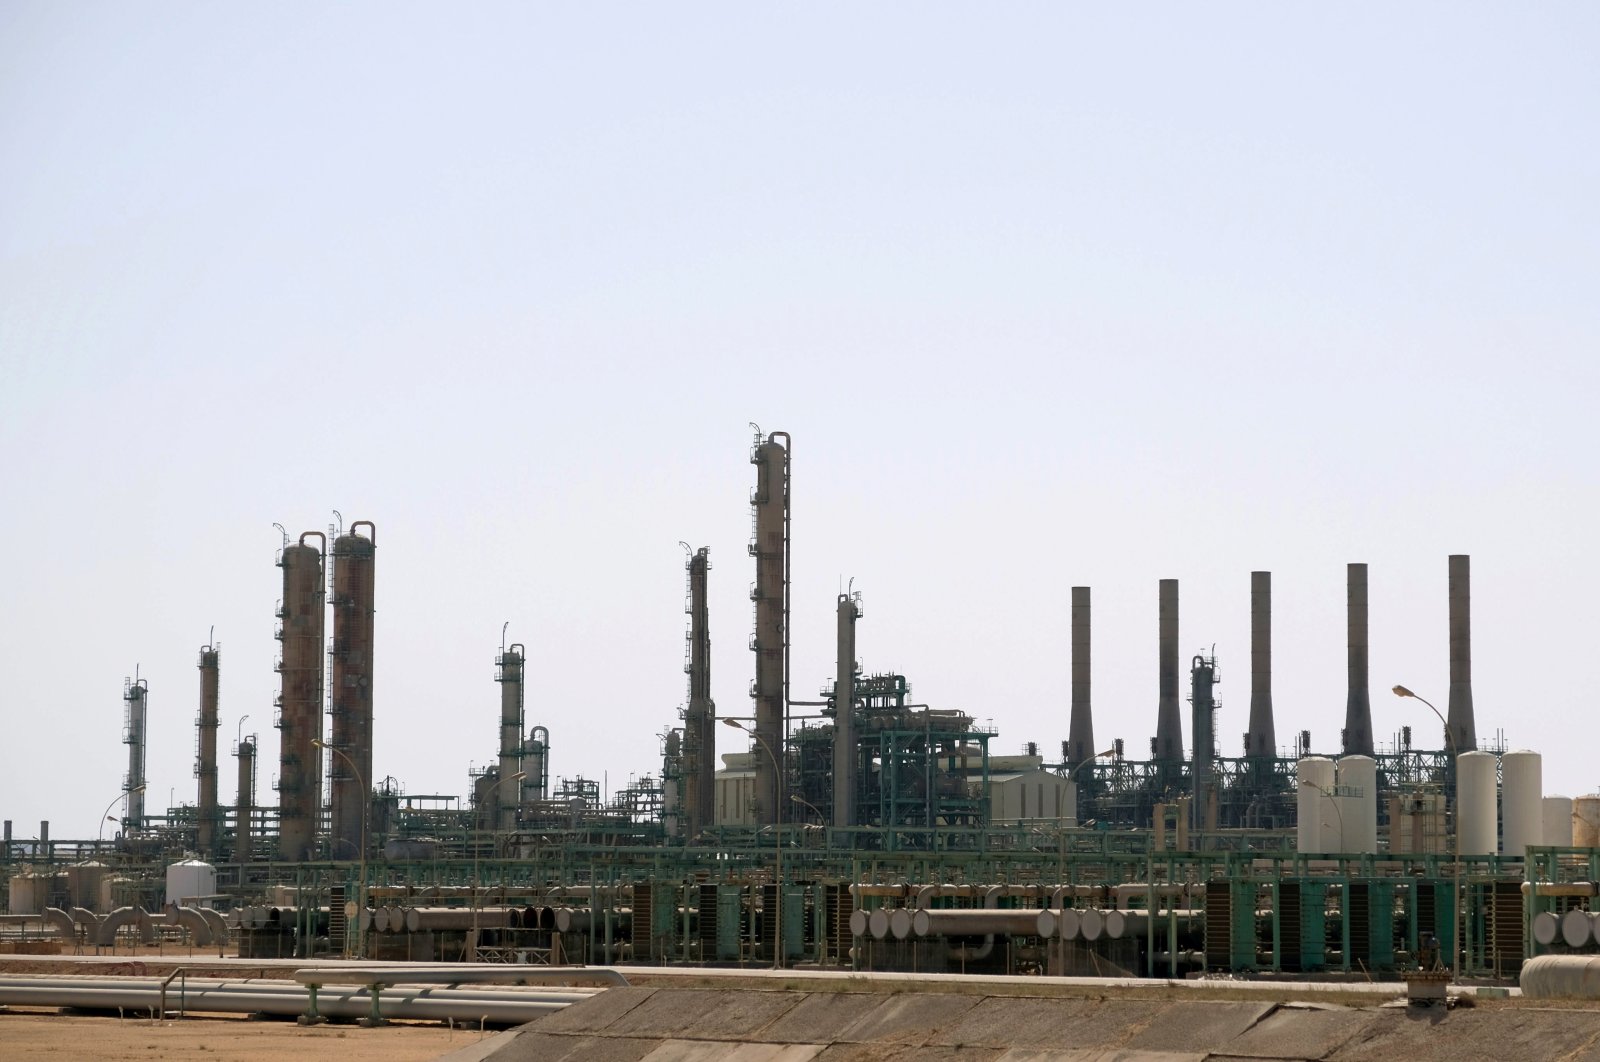 A view shows Ras Lanuf Oil and Gas Co. in Ras Lanuf, Libya Aug. 18, 2020. (Reuters Photo)